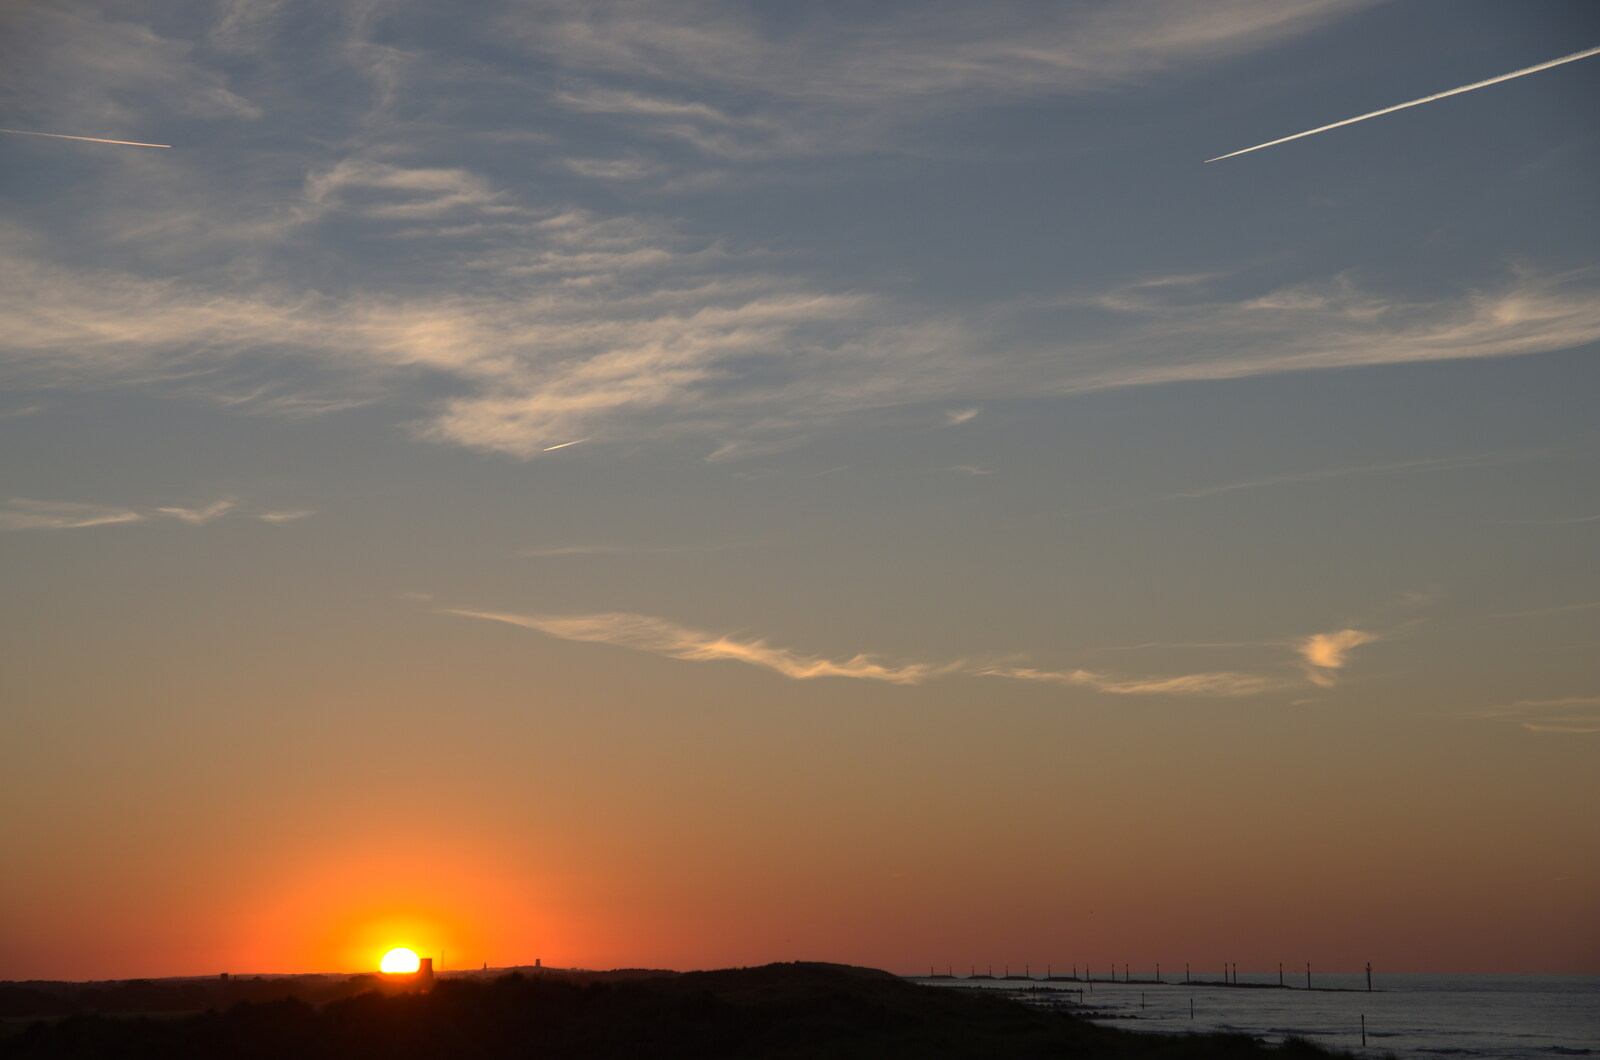 Sunset over Sea Palling from Camping in the Dunes, Waxham Sands, Norfolk - 9th July 2022